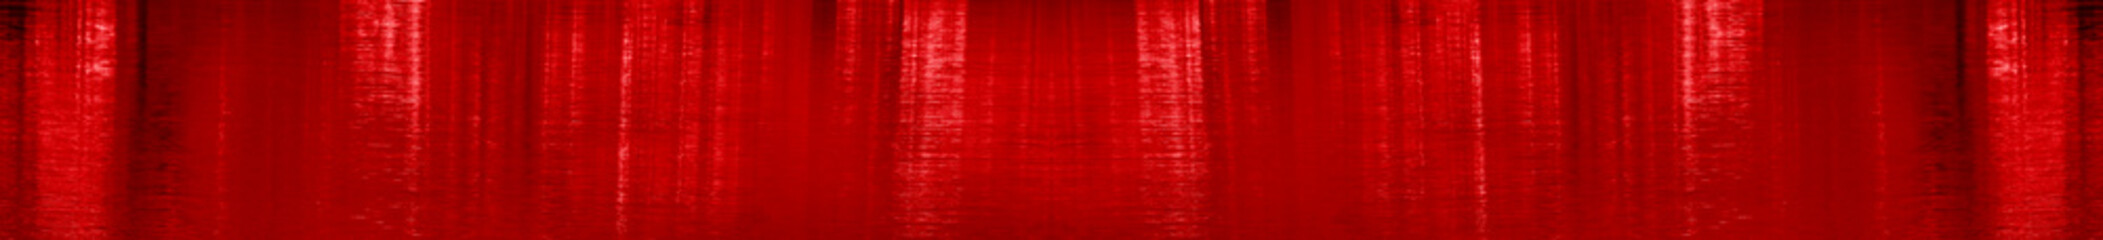 Wall Mural - Red abstract background with vertical lines. Bright red website header.red velvet curtain background